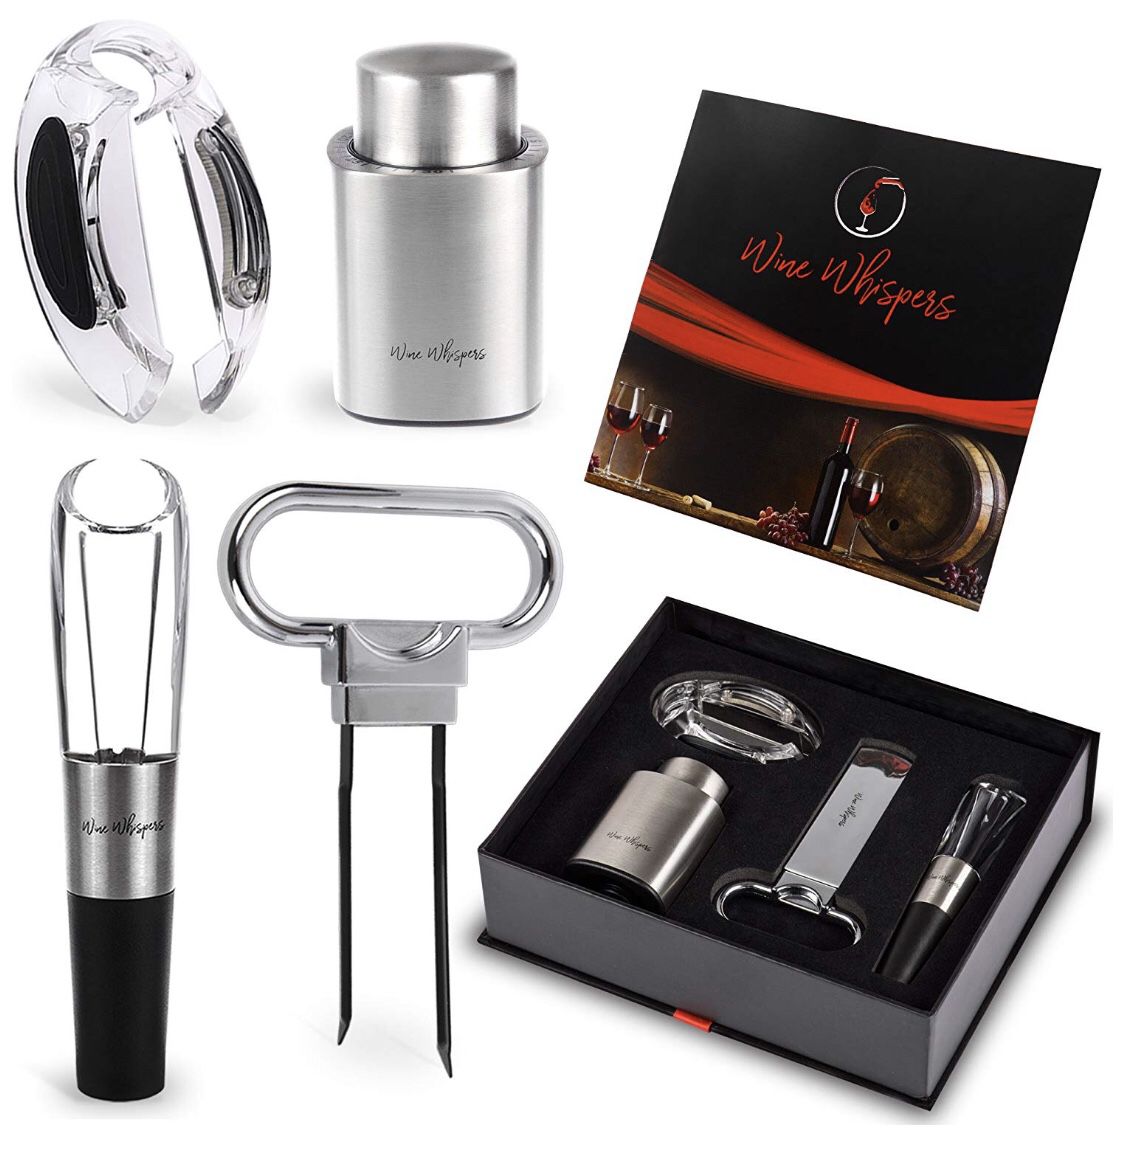 Wine Bottle Opener Set including Foil Cutter Wine Aerator Cork Puller and the best Free Bonus Vacuum Pump and Wine and Food pairing eBook!